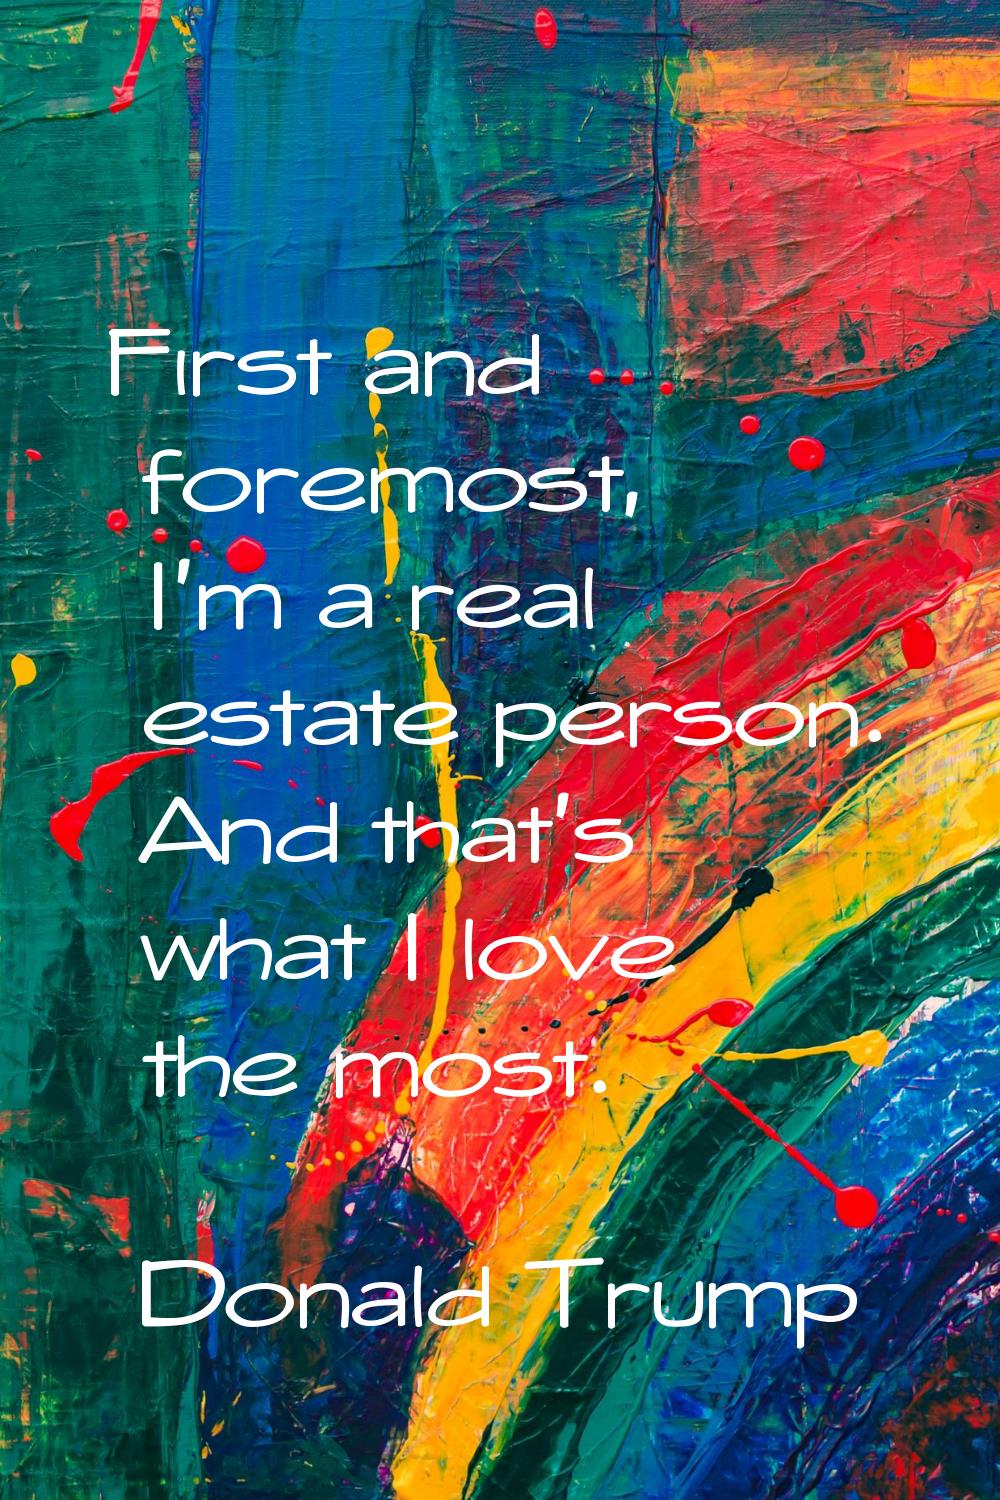 First and foremost, I'm a real estate person. And that's what I love the most.